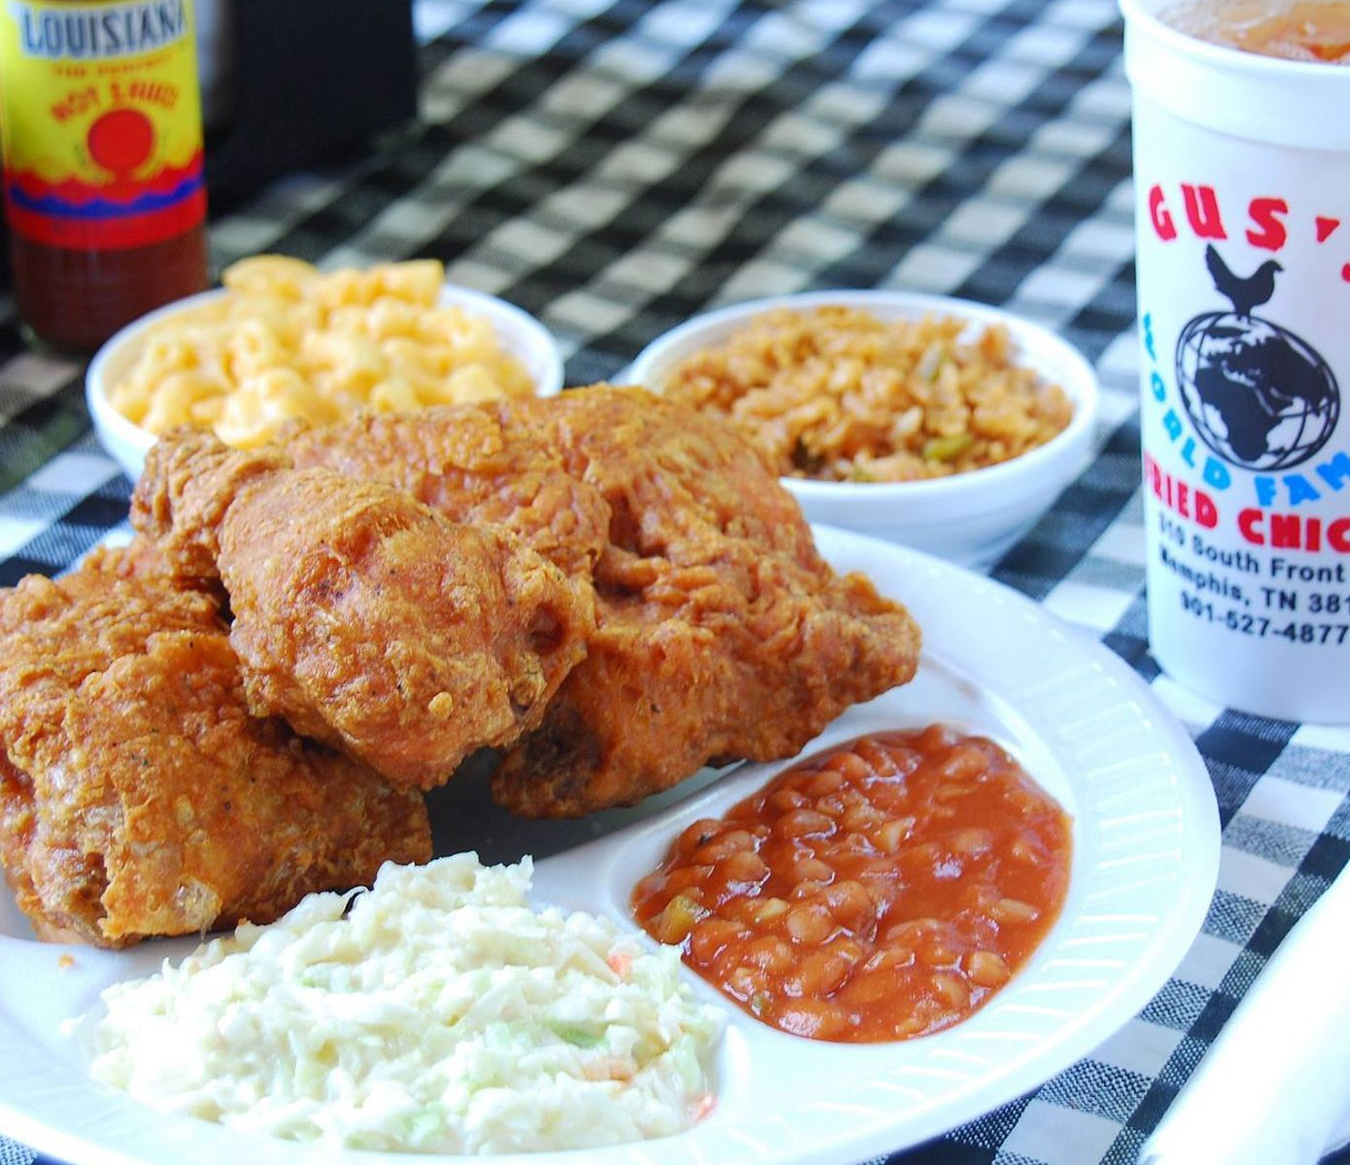 Where To Eat In Memphis - Gus's World Famous Fried Chicken